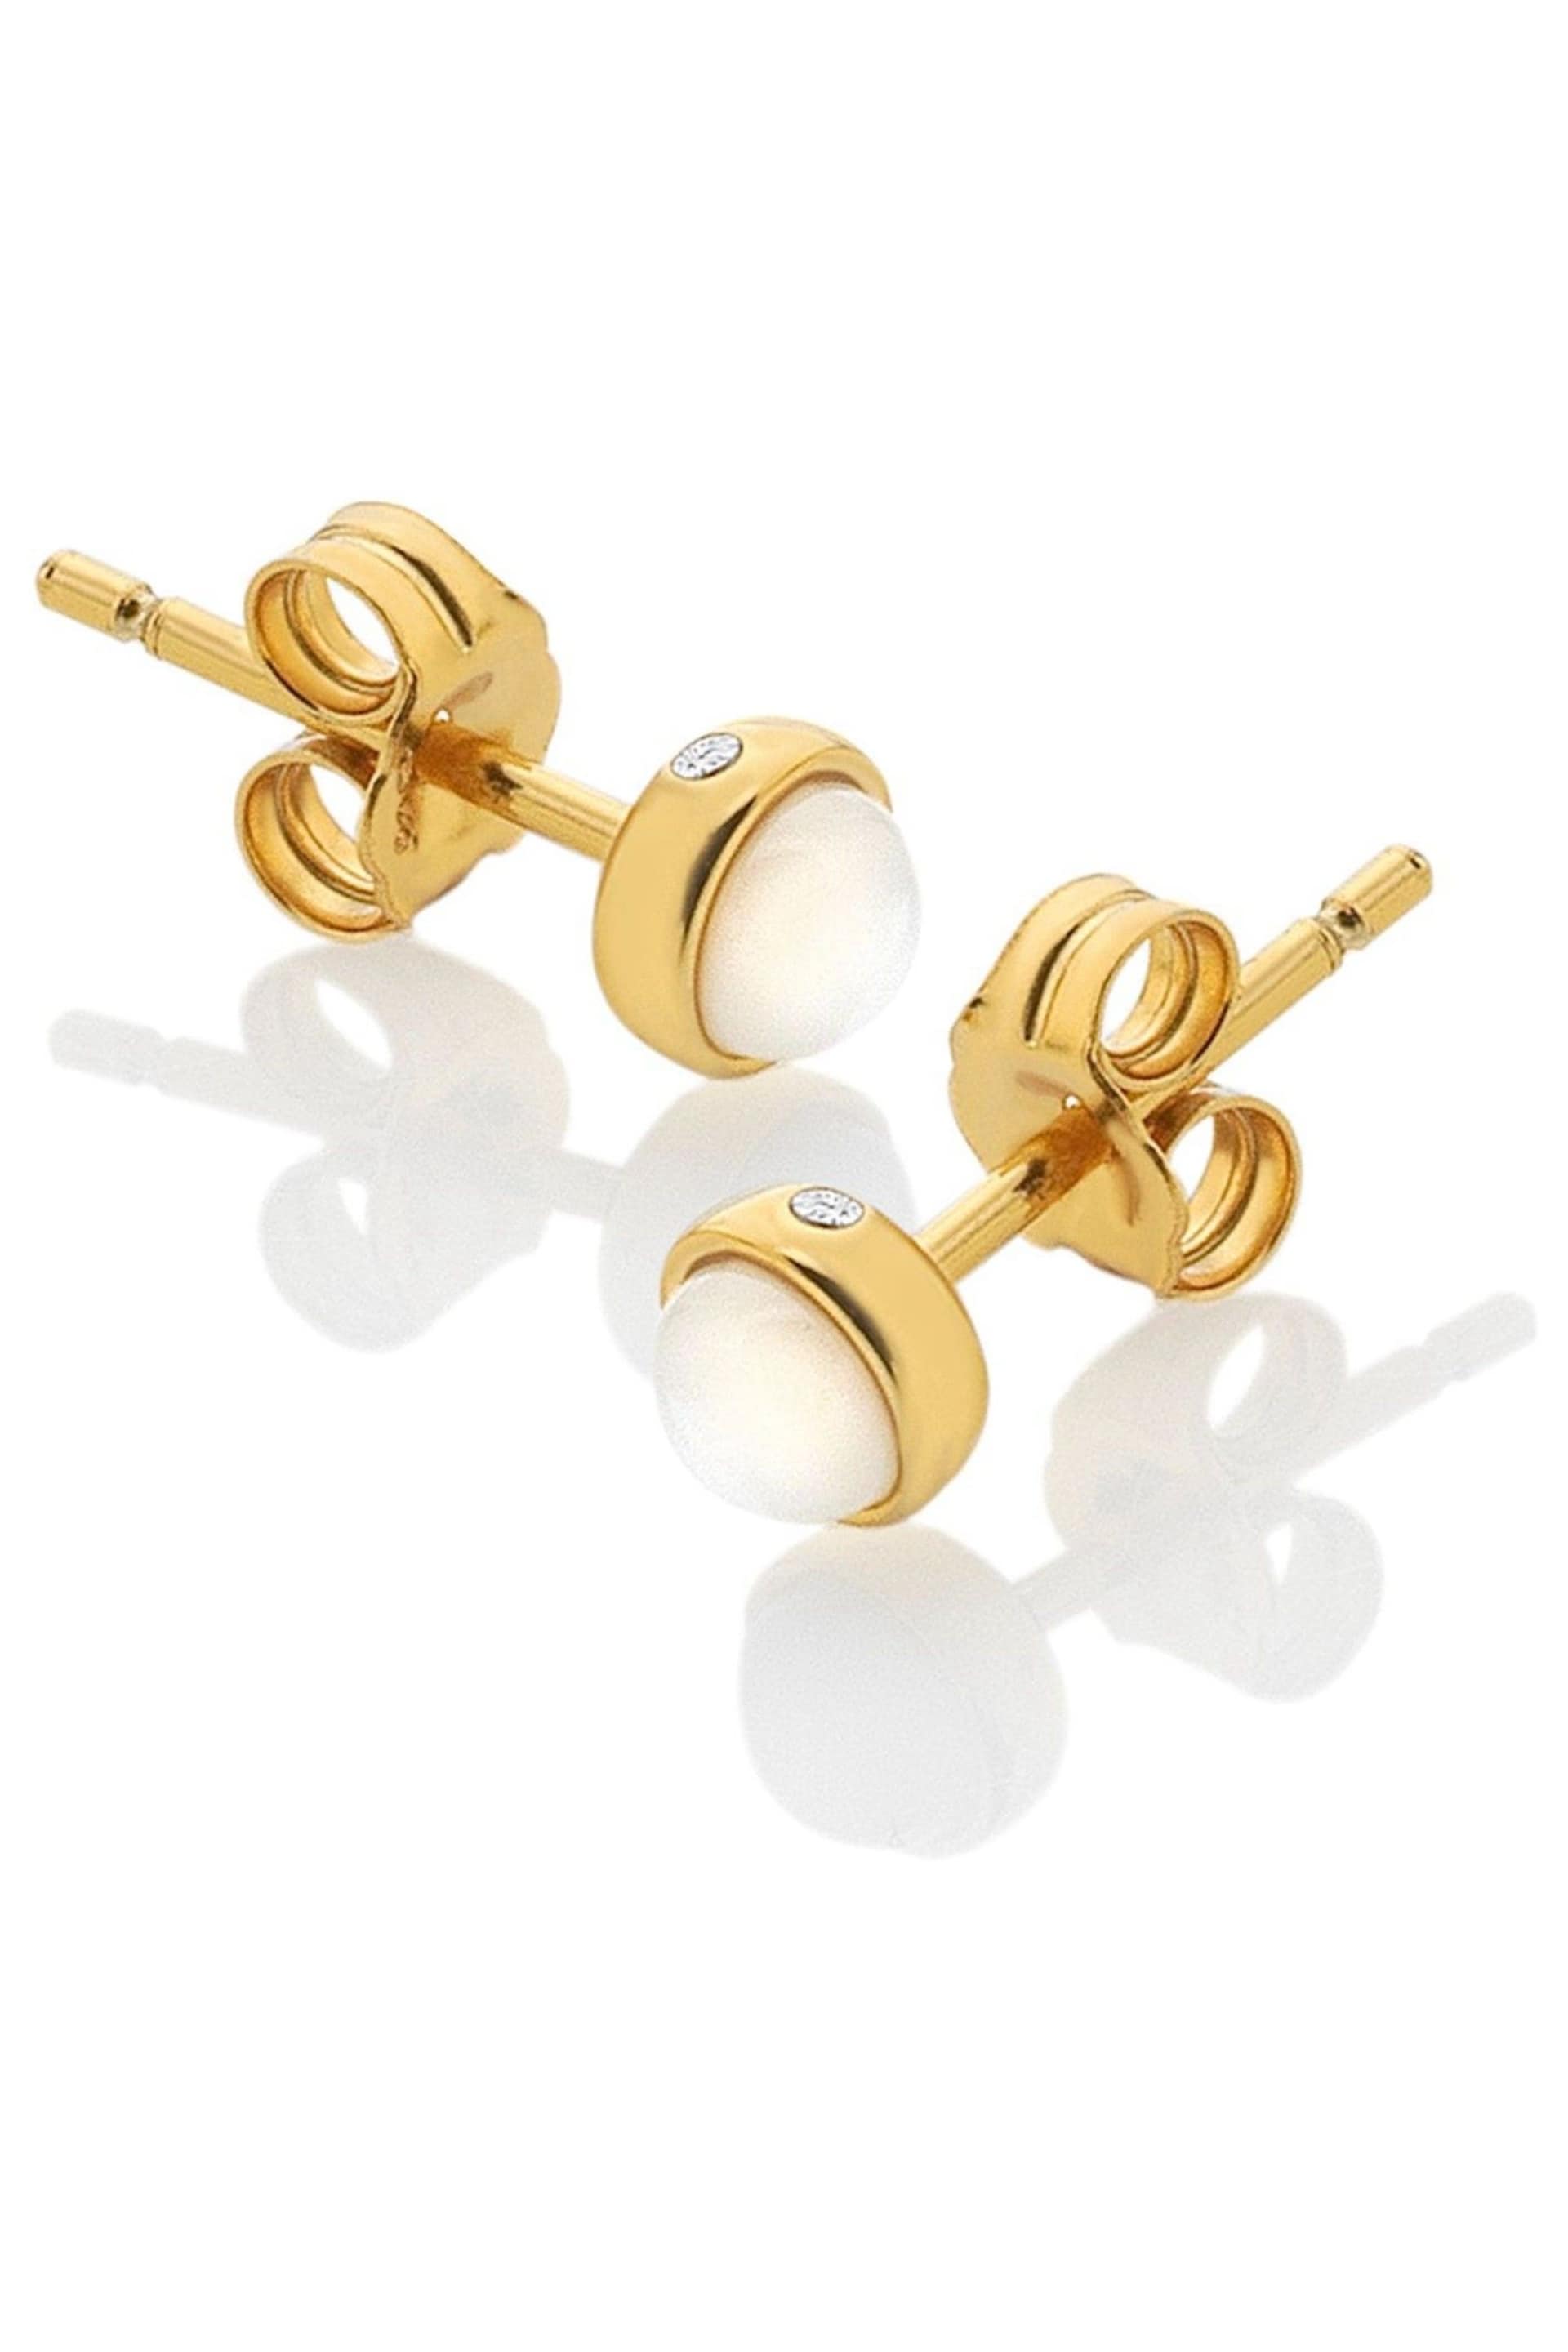 Hot Diamonds X JJ Gold Tone Calm Mother of Pearl Stud Earrings - Image 1 of 3